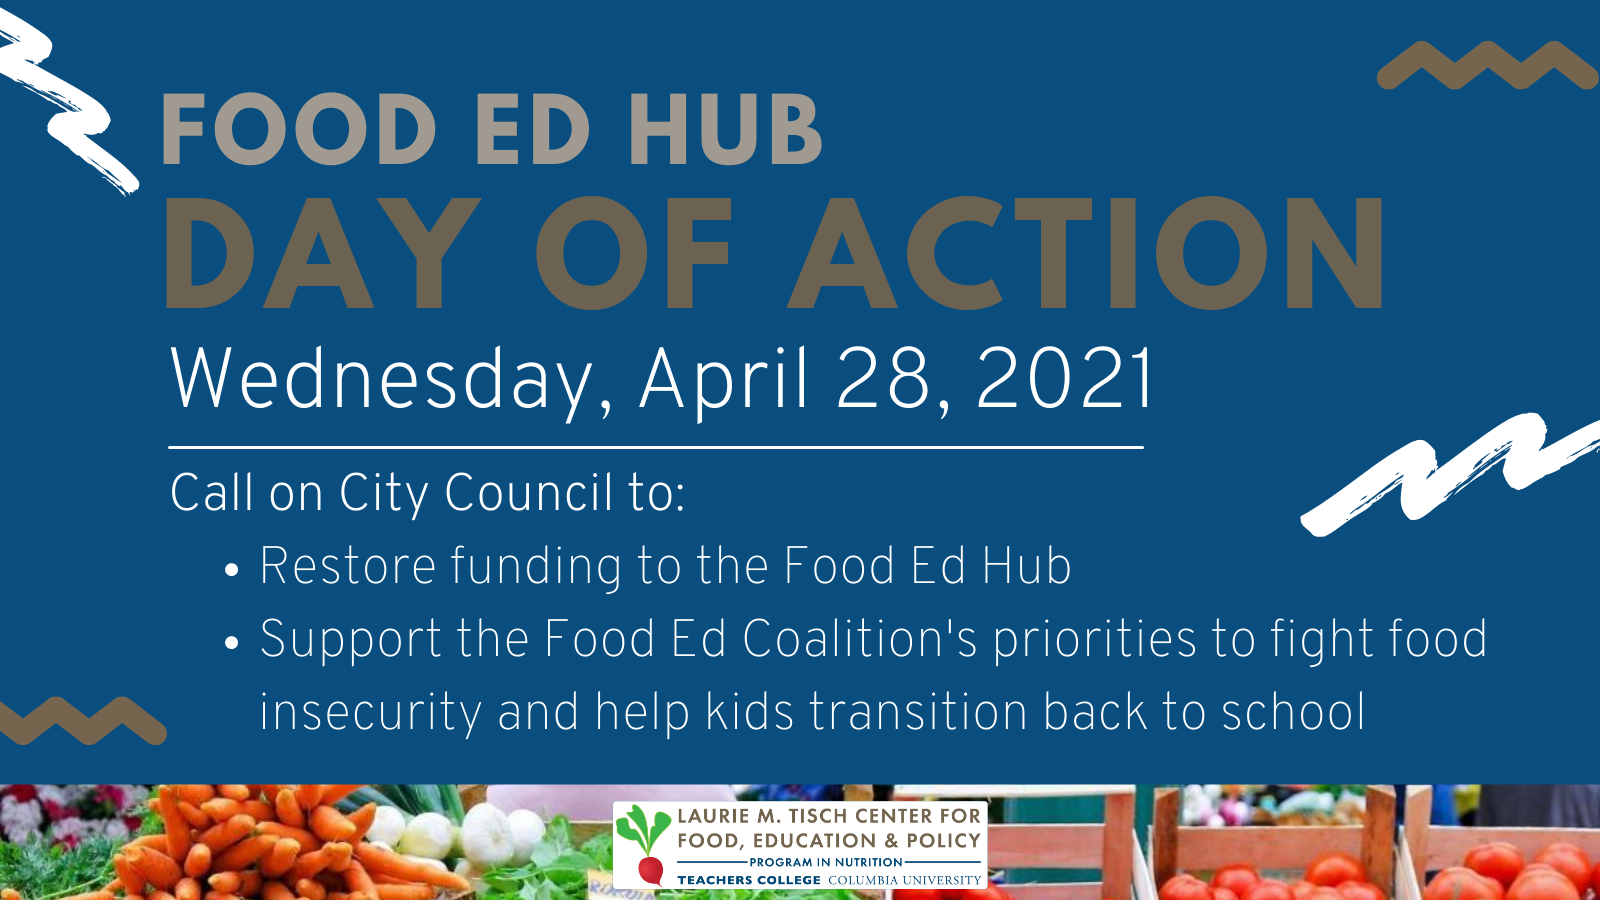 Food Ed Hub Day of Action SAVE THE DATE